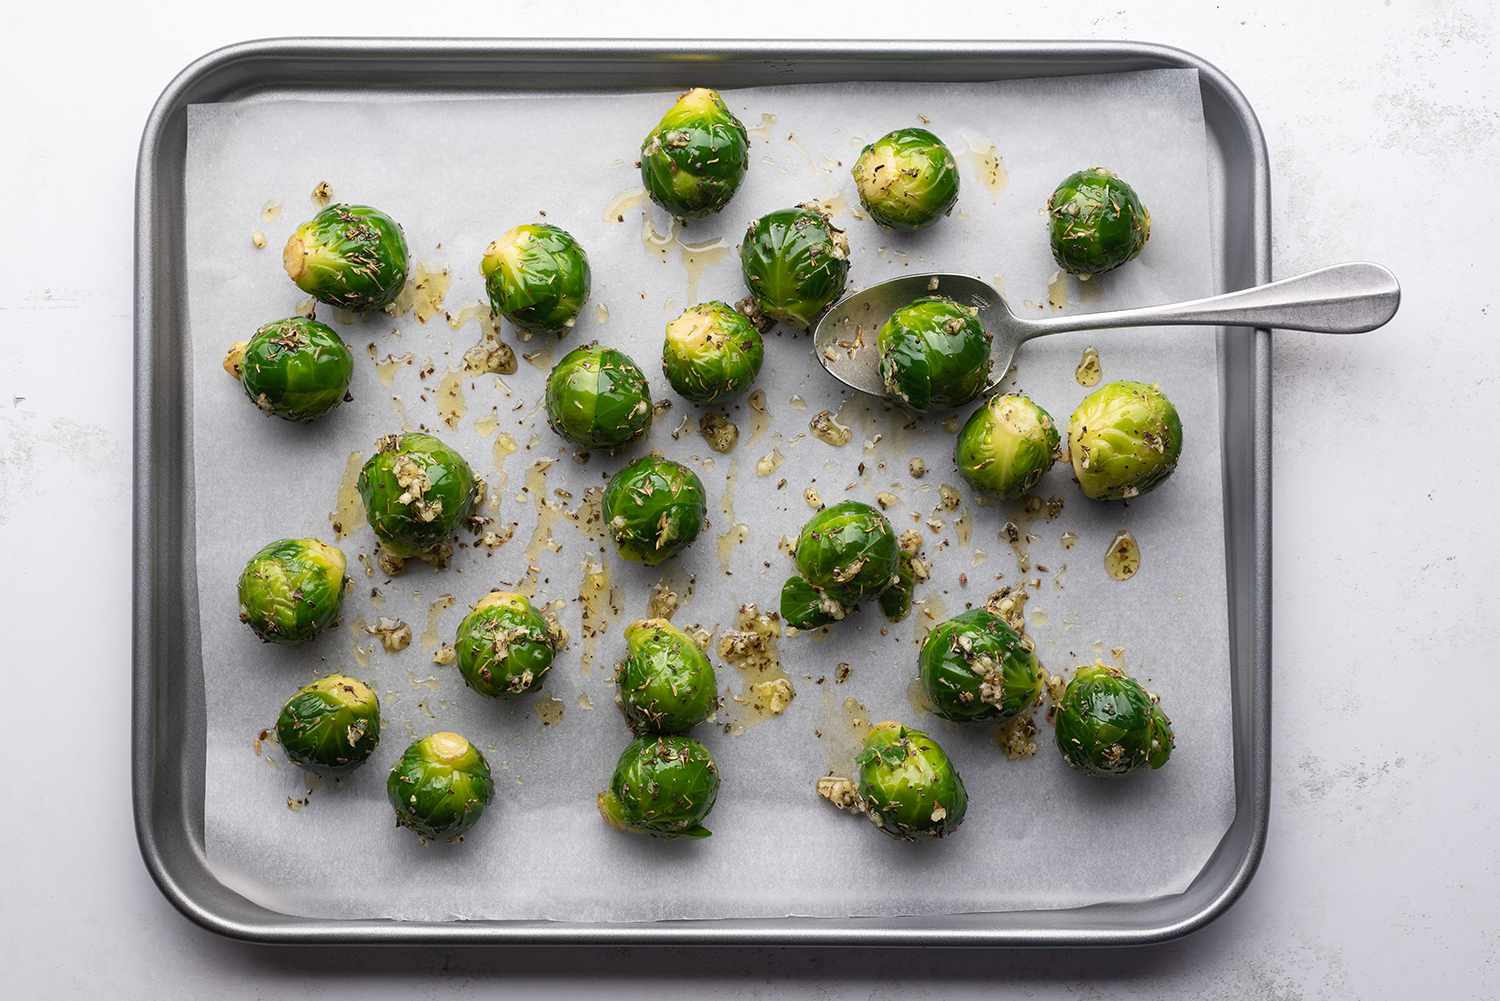 Brussels sprouts with oil, minced garlic, thyme, and basil on a parchment paper lined baking sheet, with a spoon